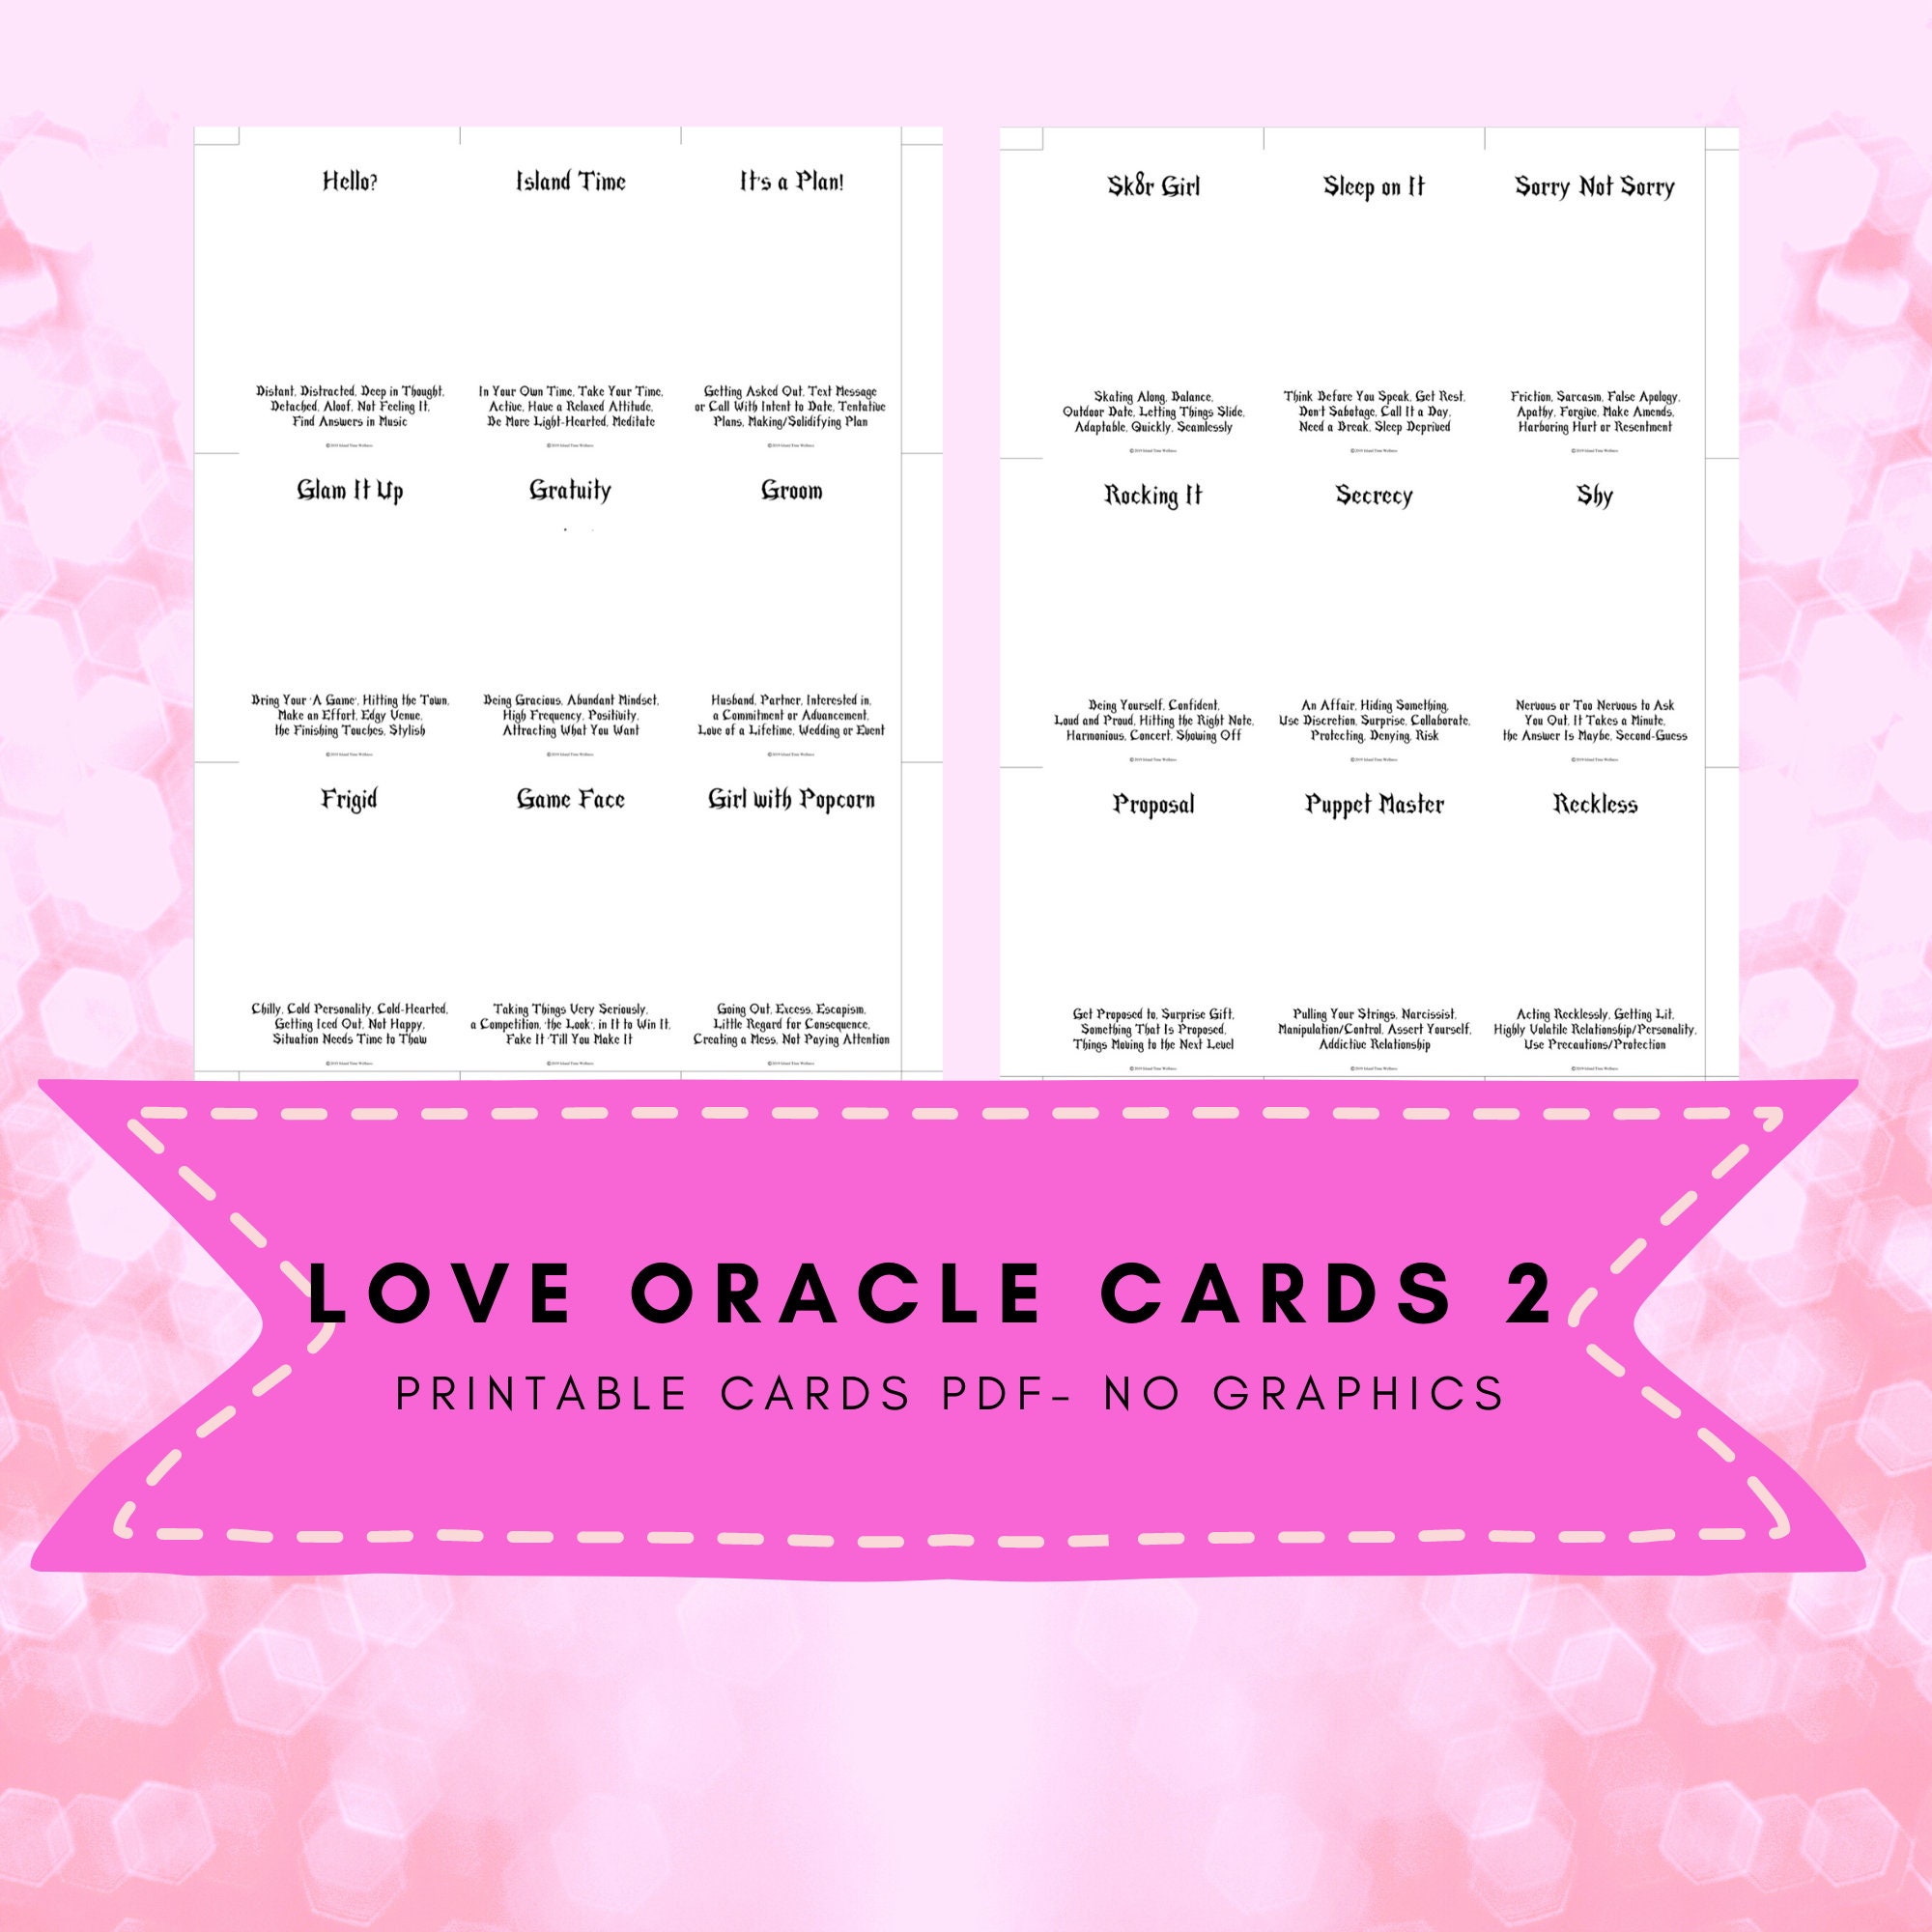 love-oracle-cards-deck-2-pdf-poker-size-no-graphics-tarot-etsy